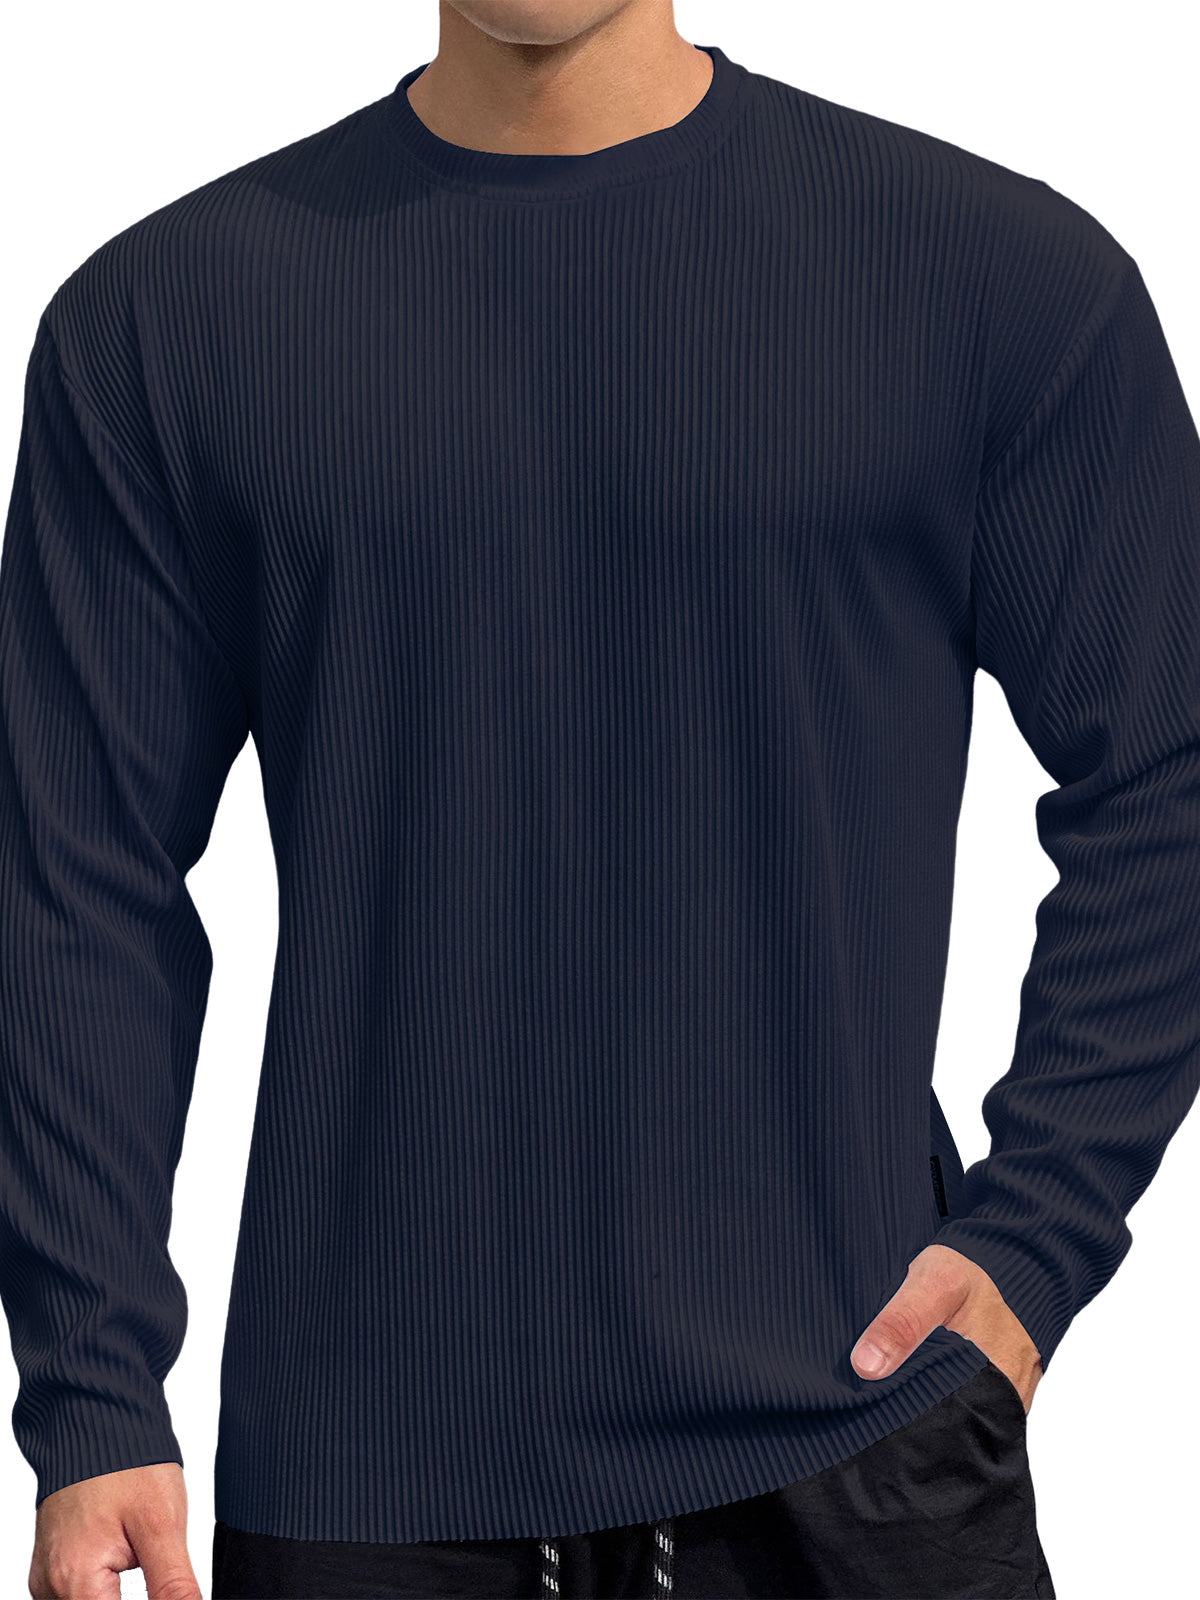 Men's Casual Round Neck Striped Loose Large Size T-Shirt